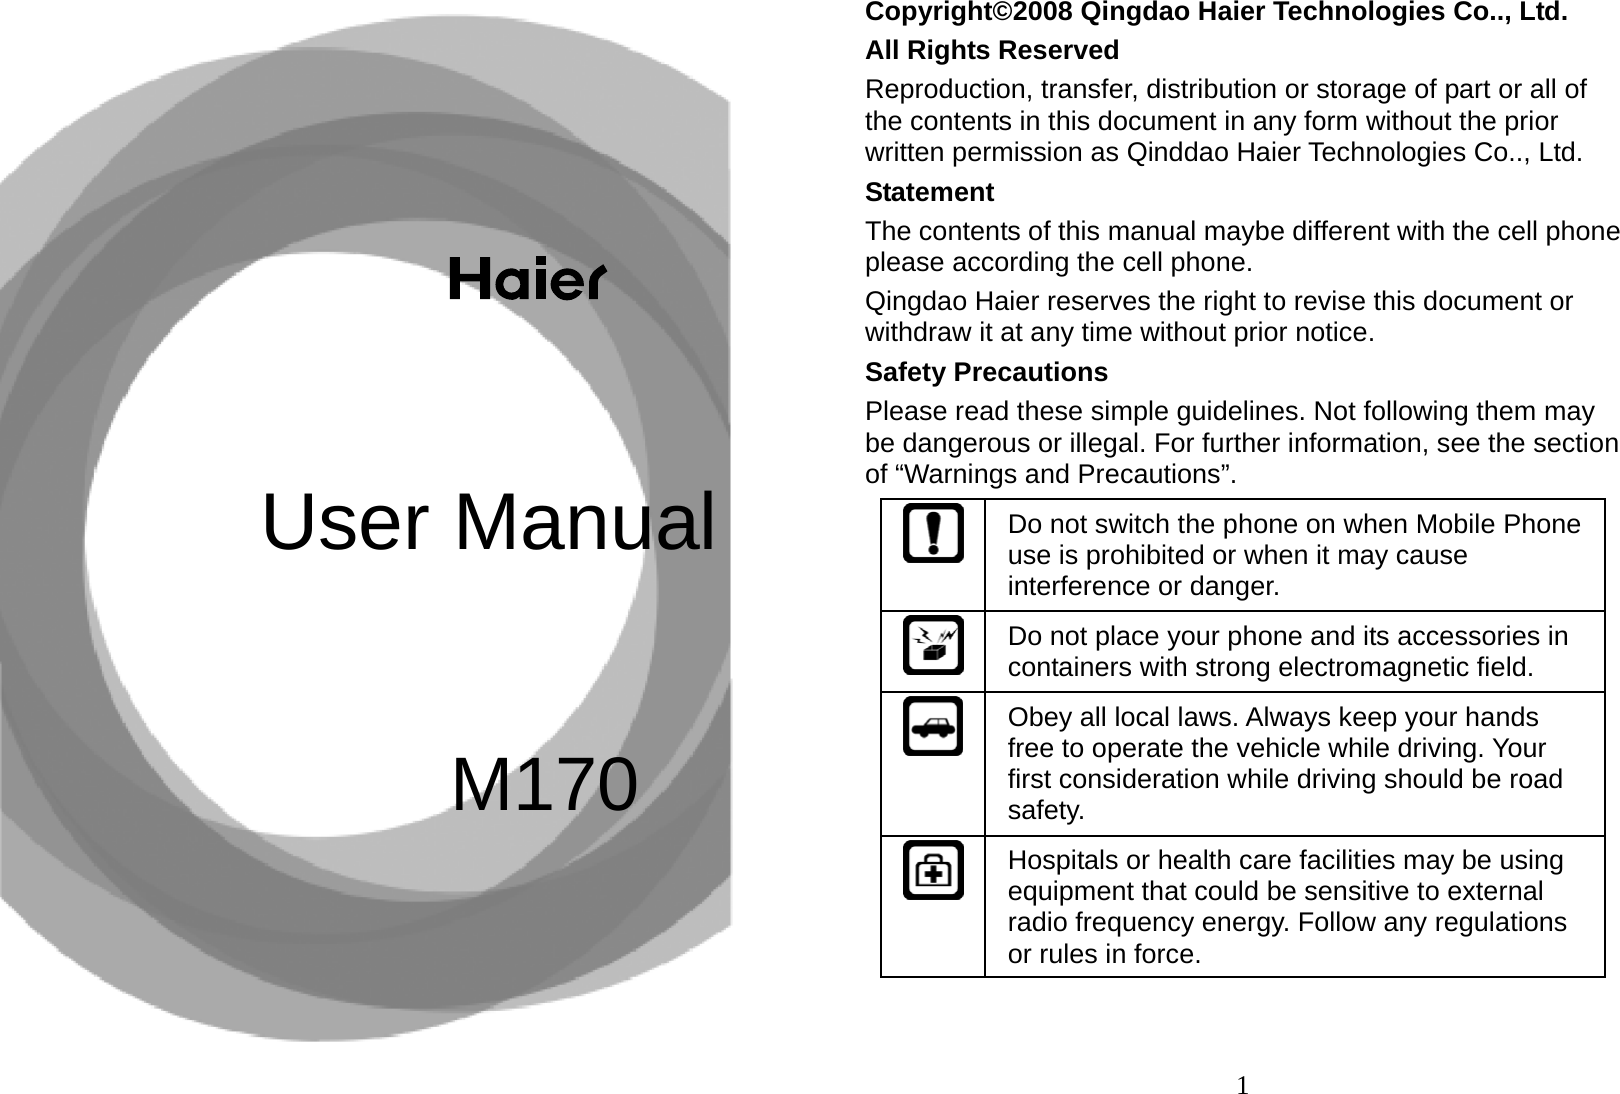 M170User Manual   1Copyright©2008 Qingdao Haier Technologies Co.., Ltd. All Rights Reserved Reproduction, transfer, distribution or storage of part or all of the contents in this document in any form without the prior written permission as Qinddao Haier Technologies Co.., Ltd. Statement The contents of this manual maybe different with the cell phone please according the cell phone. Qingdao Haier reserves the right to revise this document or withdraw it at any time without prior notice. Safety Precautions Please read these simple guidelines. Not following them may be dangerous or illegal. For further information, see the section of “Warnings and Precautions”. Do not switch the phone on when Mobile Phone use is prohibited or when it may cause interference or danger. Do not place your phone and its accessories in containers with strong electromagnetic field. Obey all local laws. Always keep your hands free to operate the vehicle while driving. Your first consideration while driving should be road safety. Hospitals or health care facilities may be using equipment that could be sensitive to external radio frequency energy. Follow any regulations or rules in force. 